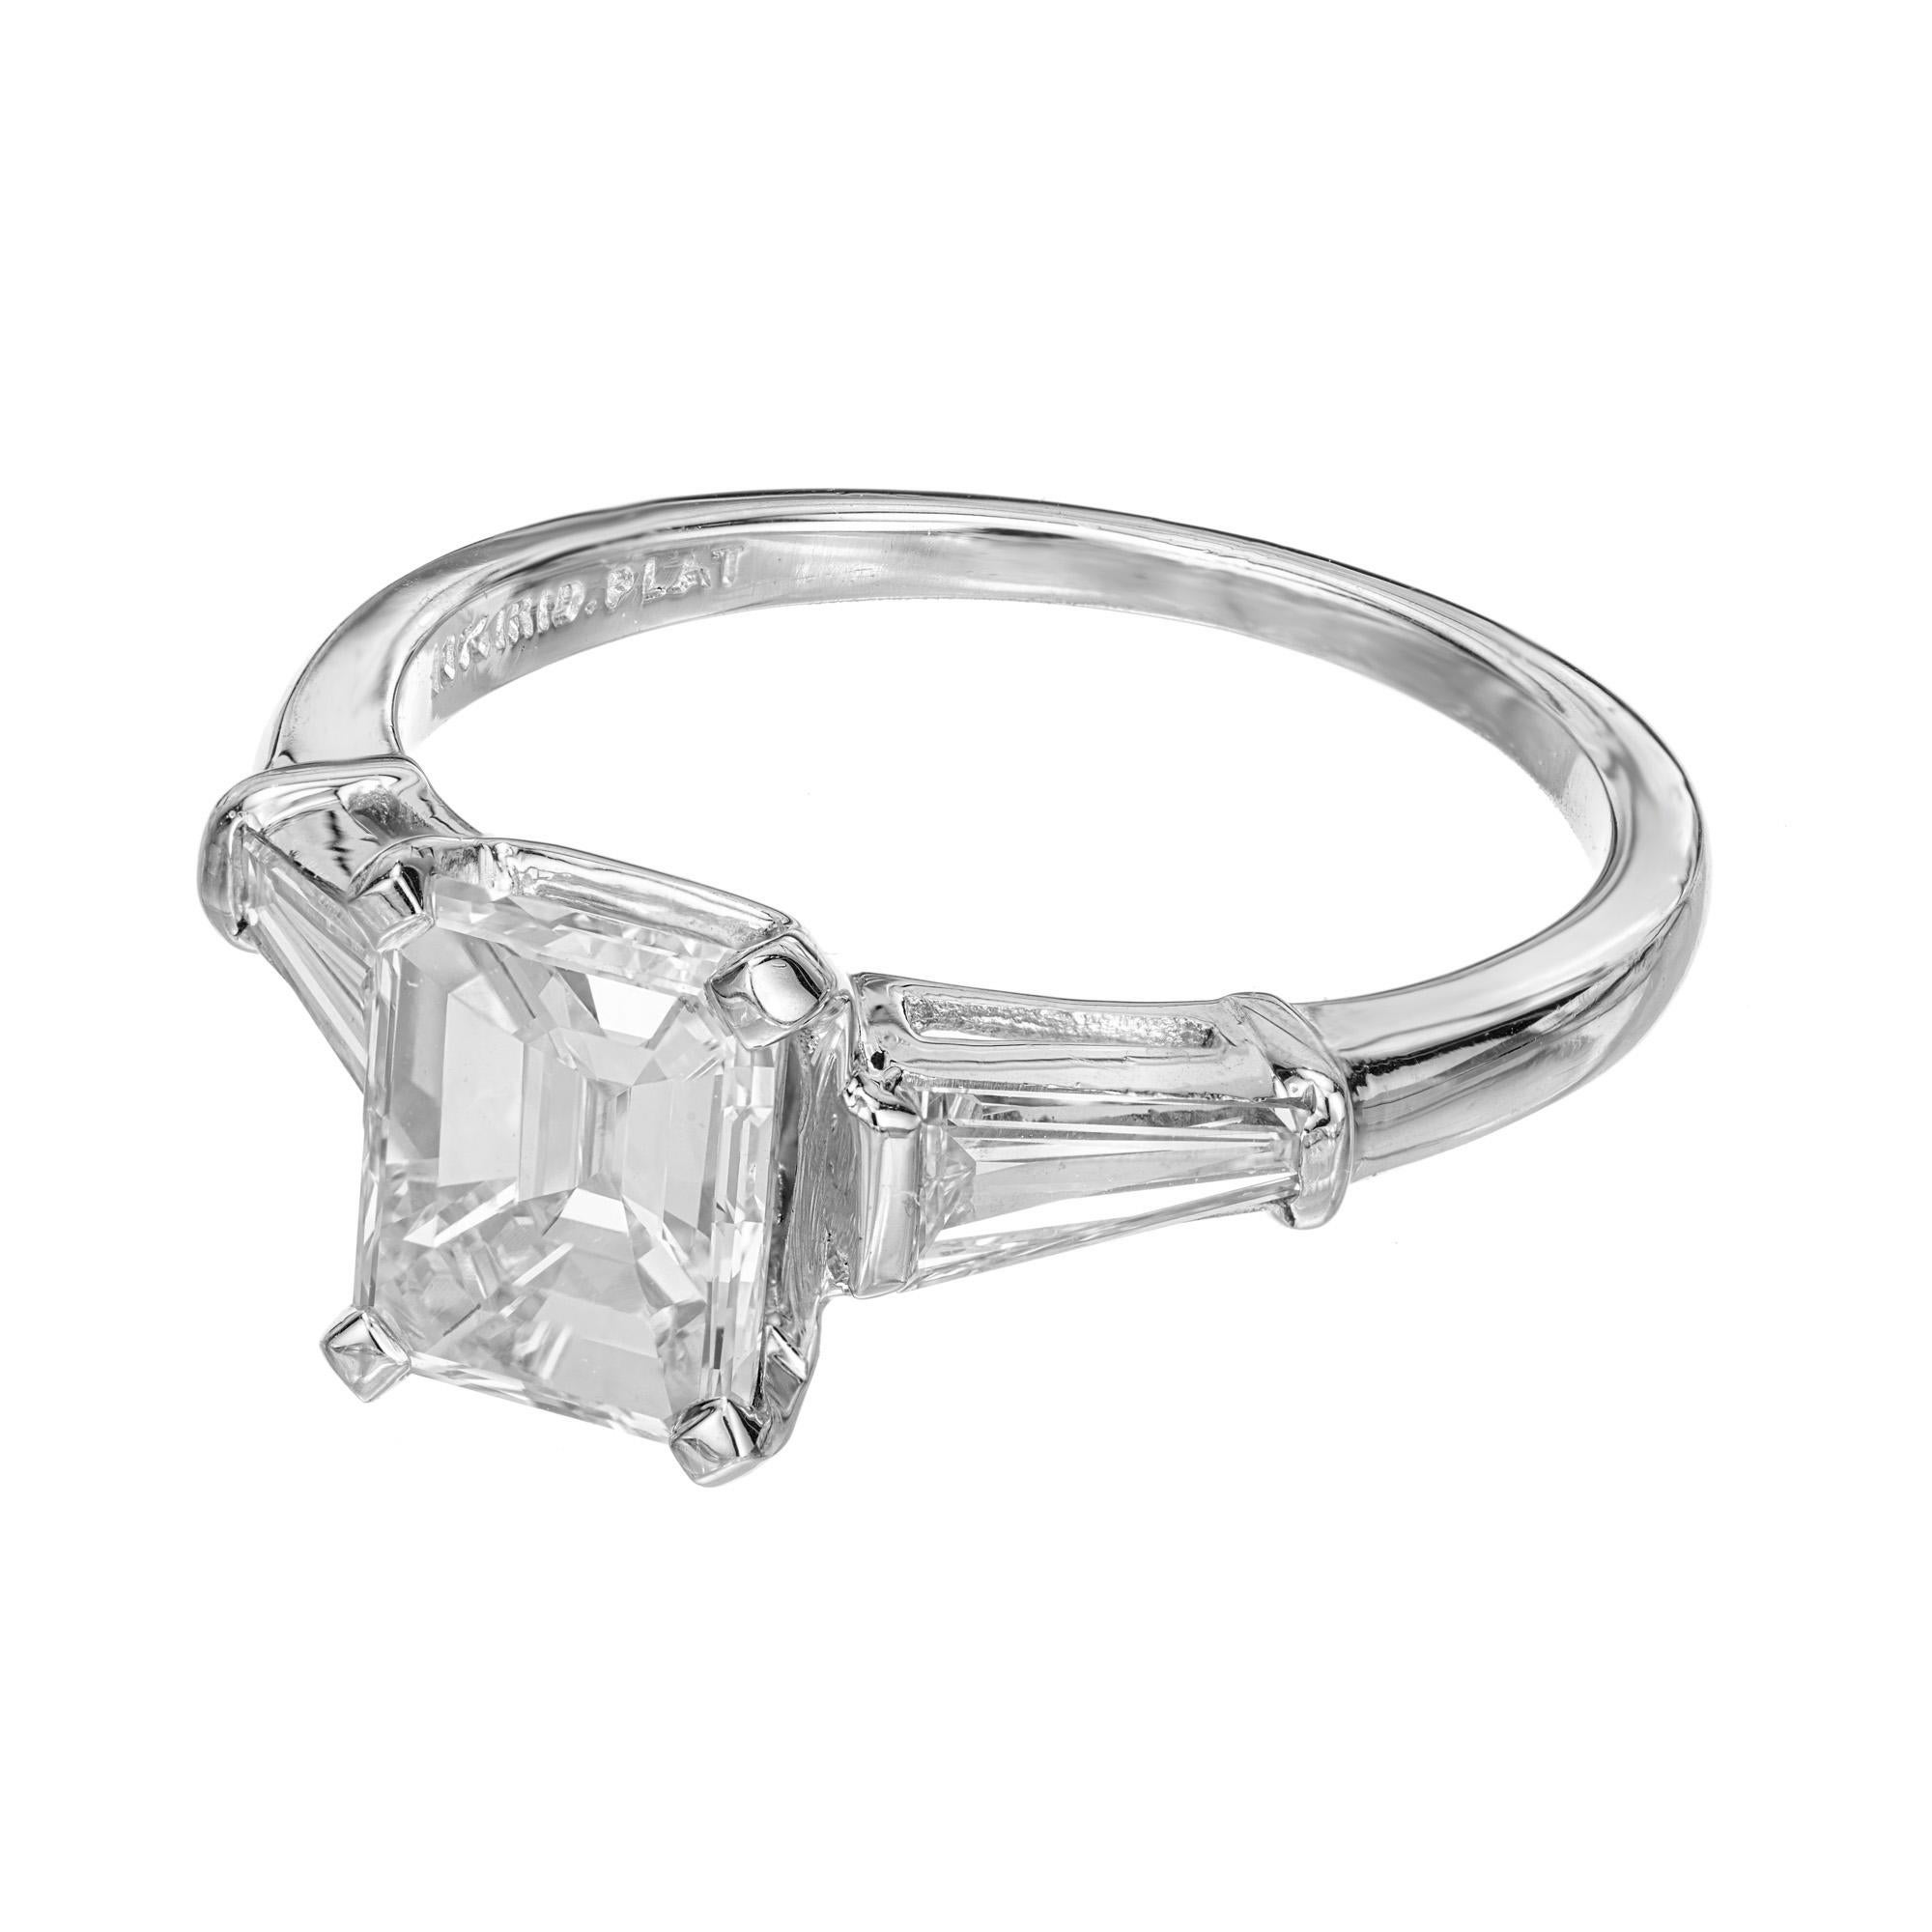 Peter Suchy GIA 1.51 Carat Emerald Cut Diamond Platinum Engagement Ring In Good Condition For Sale In Stamford, CT